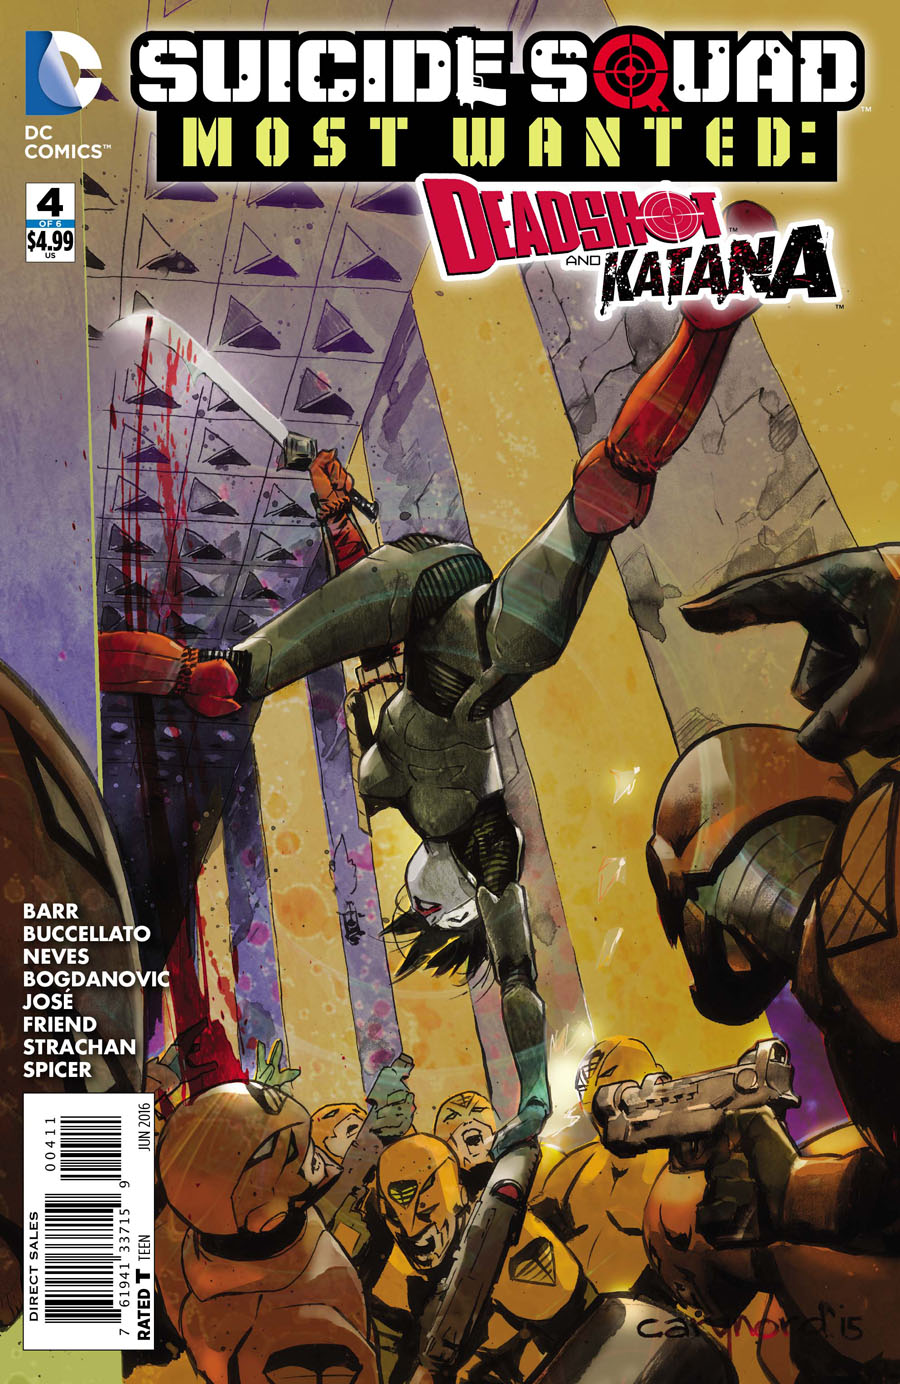 Suicide Squad Most Wanted Deadshot Katana #4